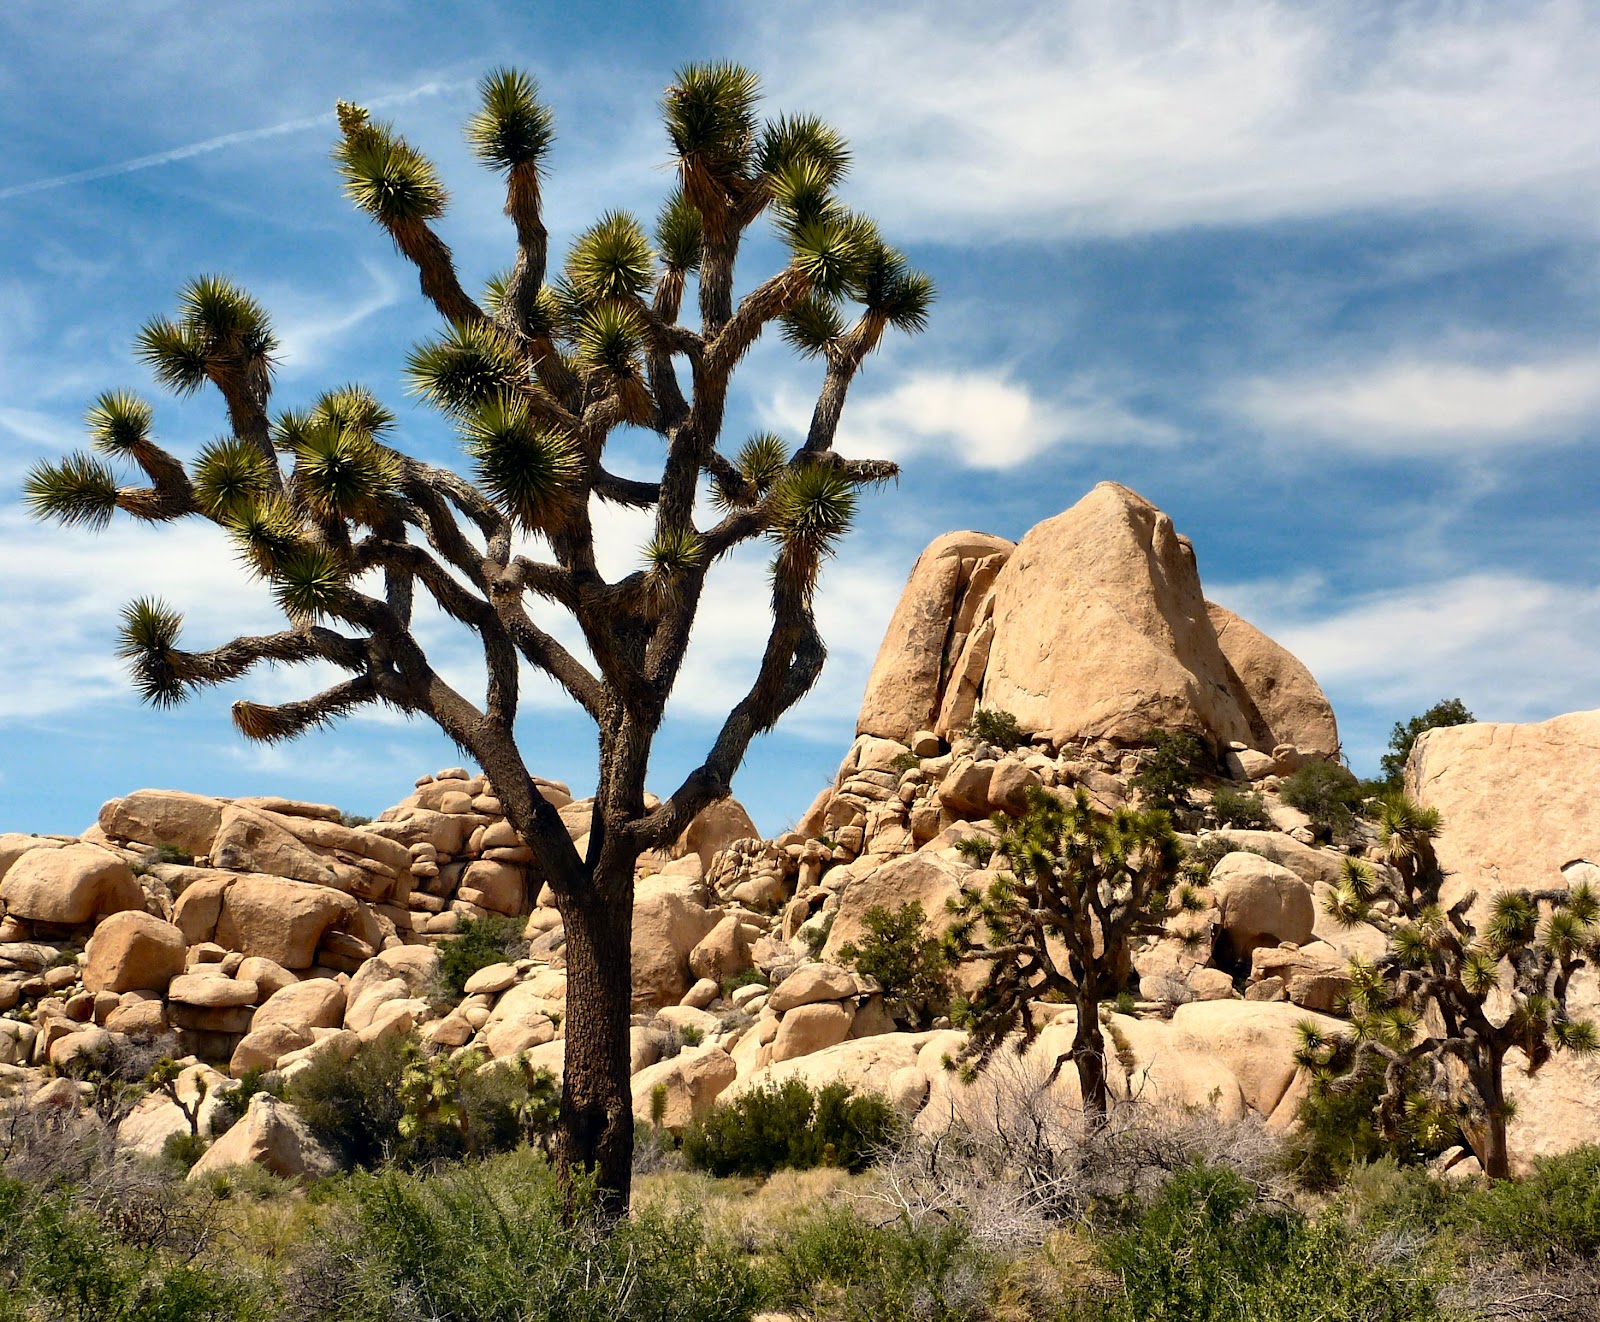 How Was Your Trip Joshua Tree Np